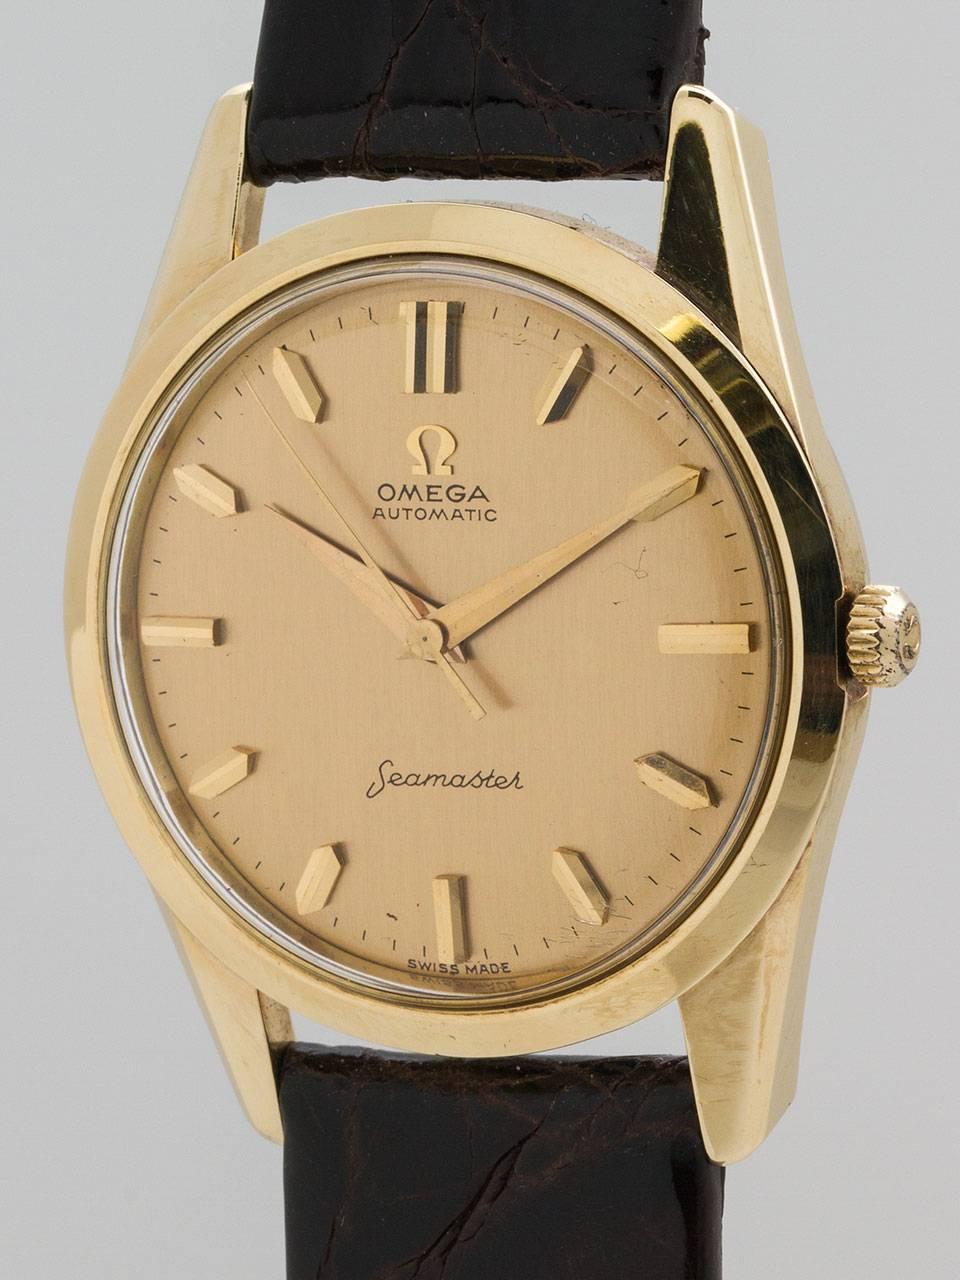 Omega 14K Yellow Gold Seamaster Automatic ref 14700 SC, serial #17 million circa 1960. Case measuring 35 x 40mm, screw down case back with deeply die struck high relief Seamonster logo. Pristine condition original sold gold dial with mirror gold